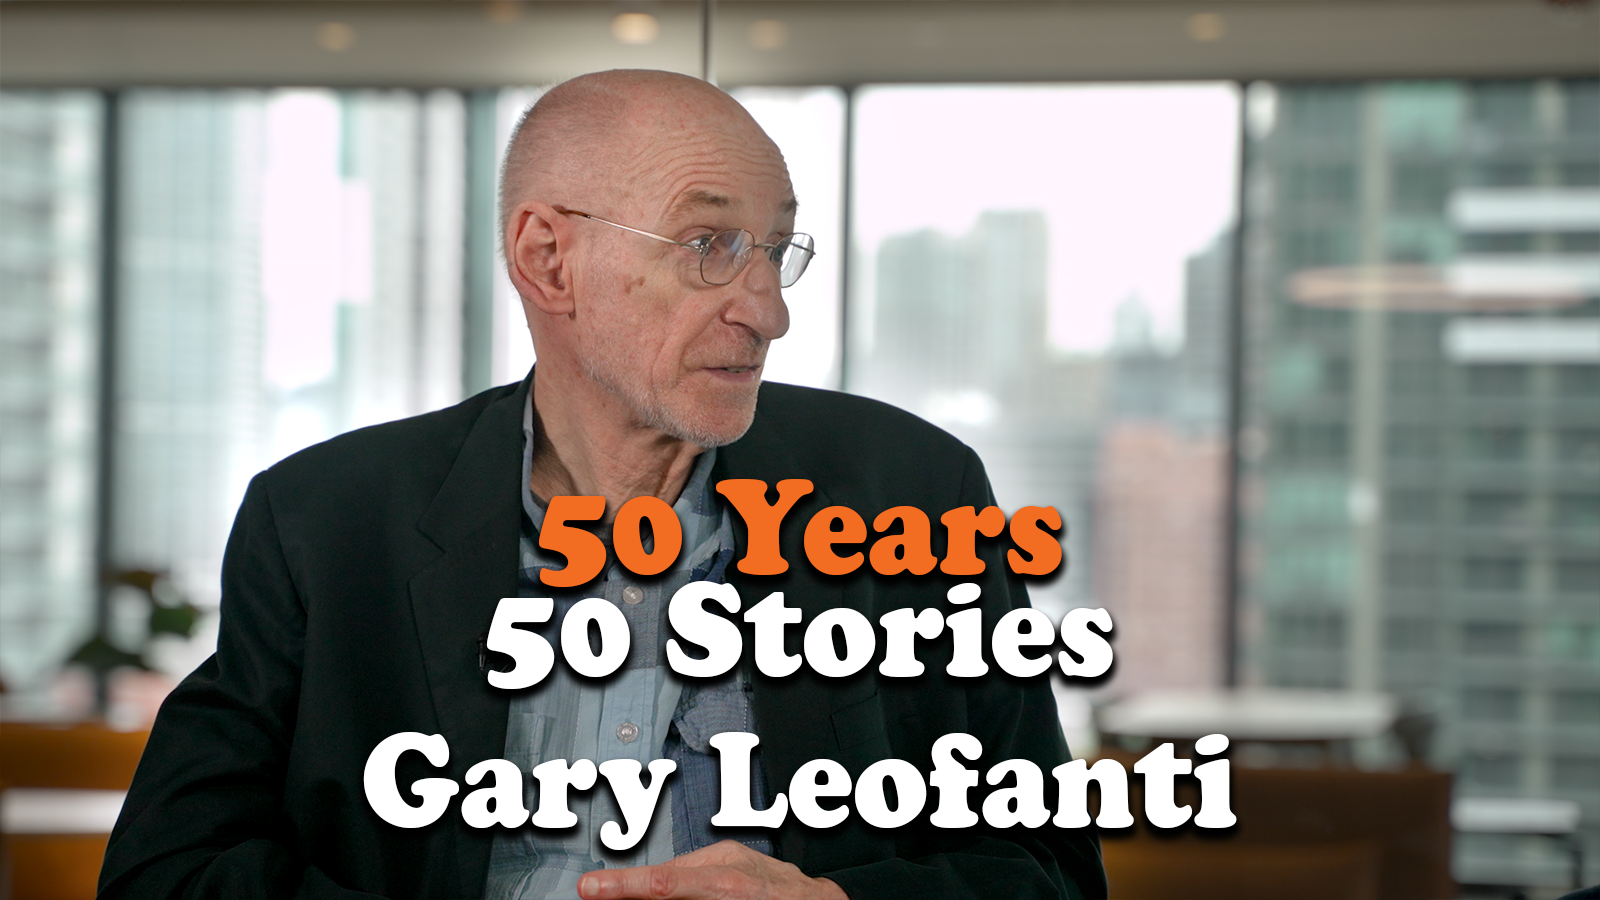 Youth worker on the job: An interview with founding director Gary Leofanti